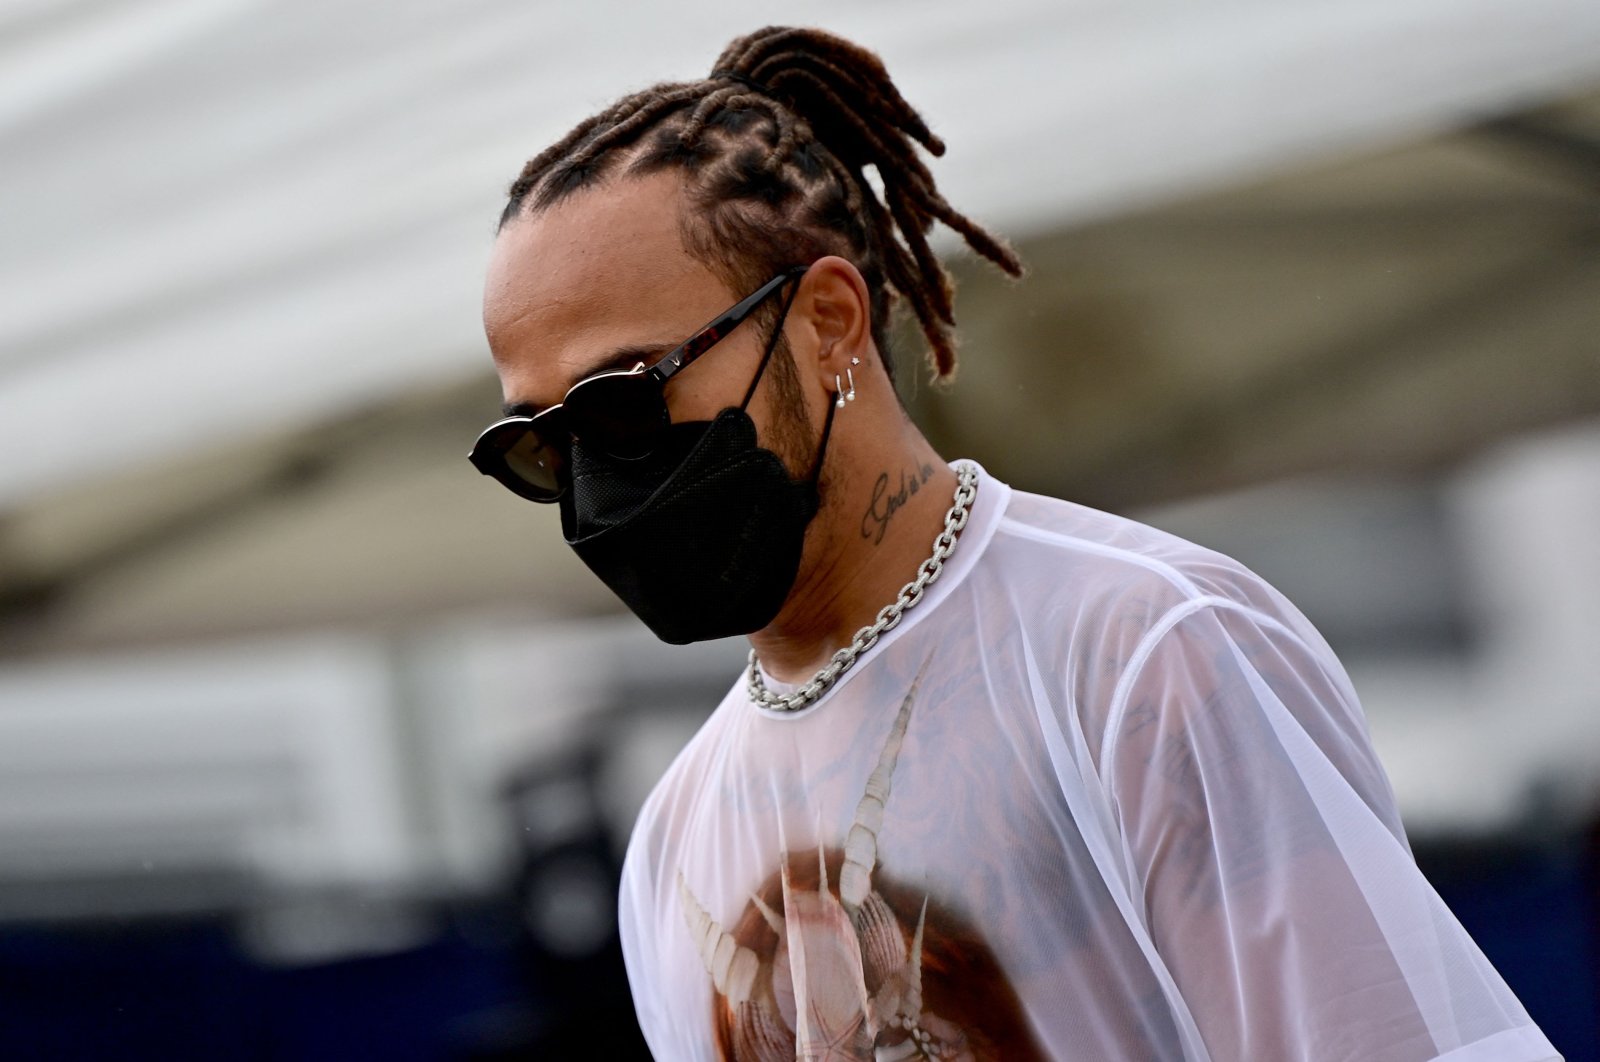 Mercedes' British driver Lewis Hamilton walks to the paddock at the Red Bull Ring race track in Spielberg, Austria, July 1, 2021. (AFP Photo)